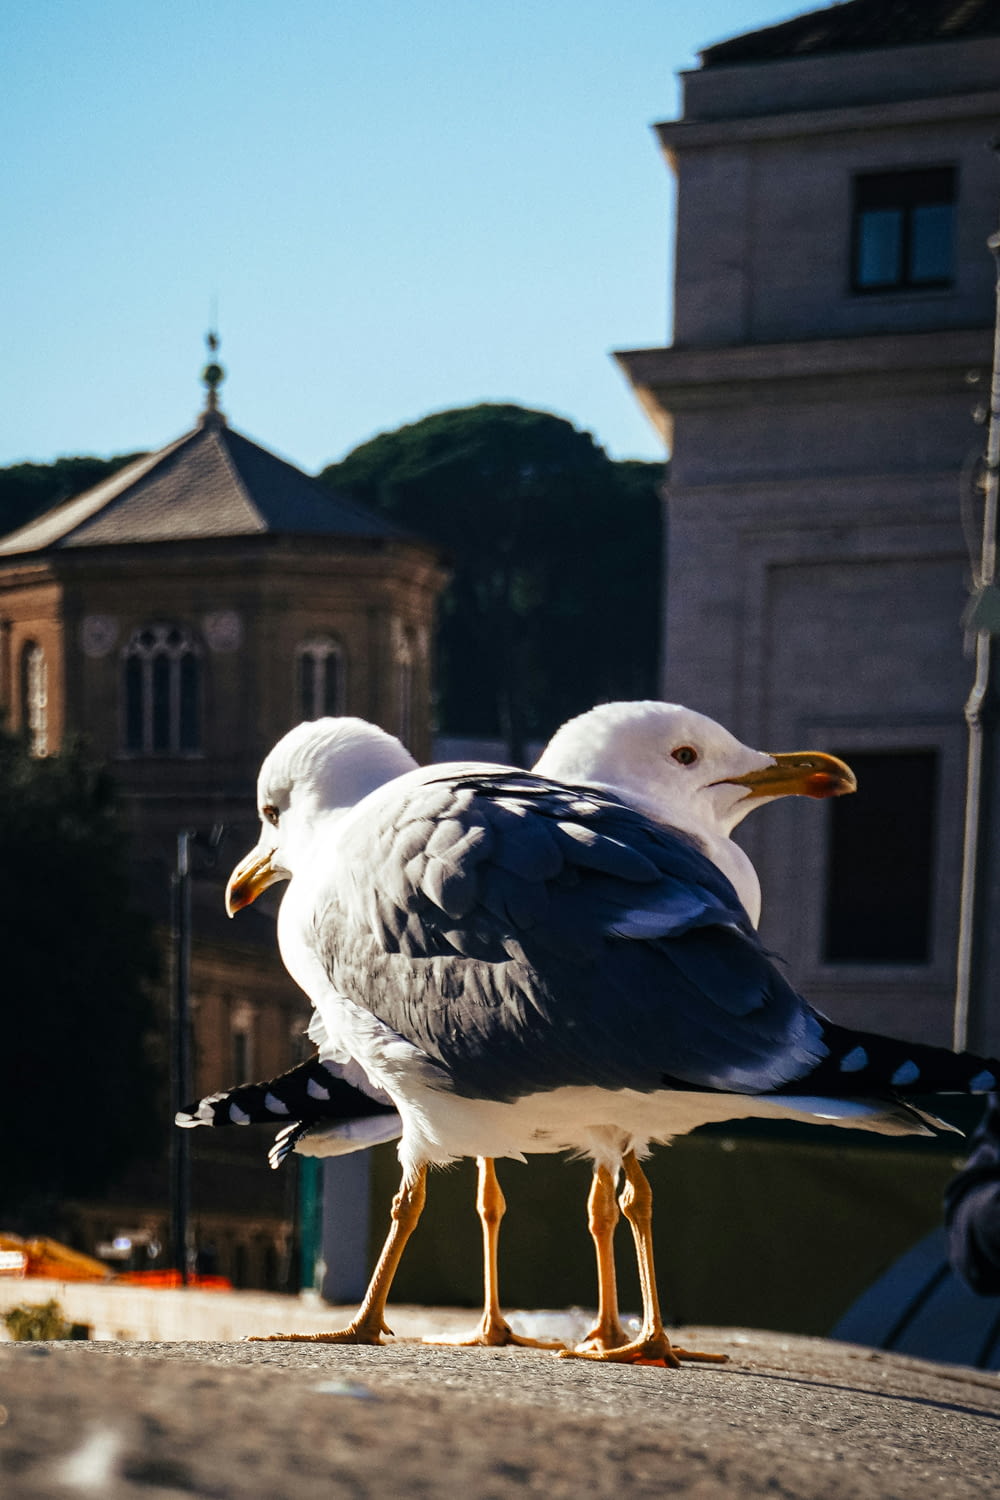 two seagulls are standing on a ledge near a building